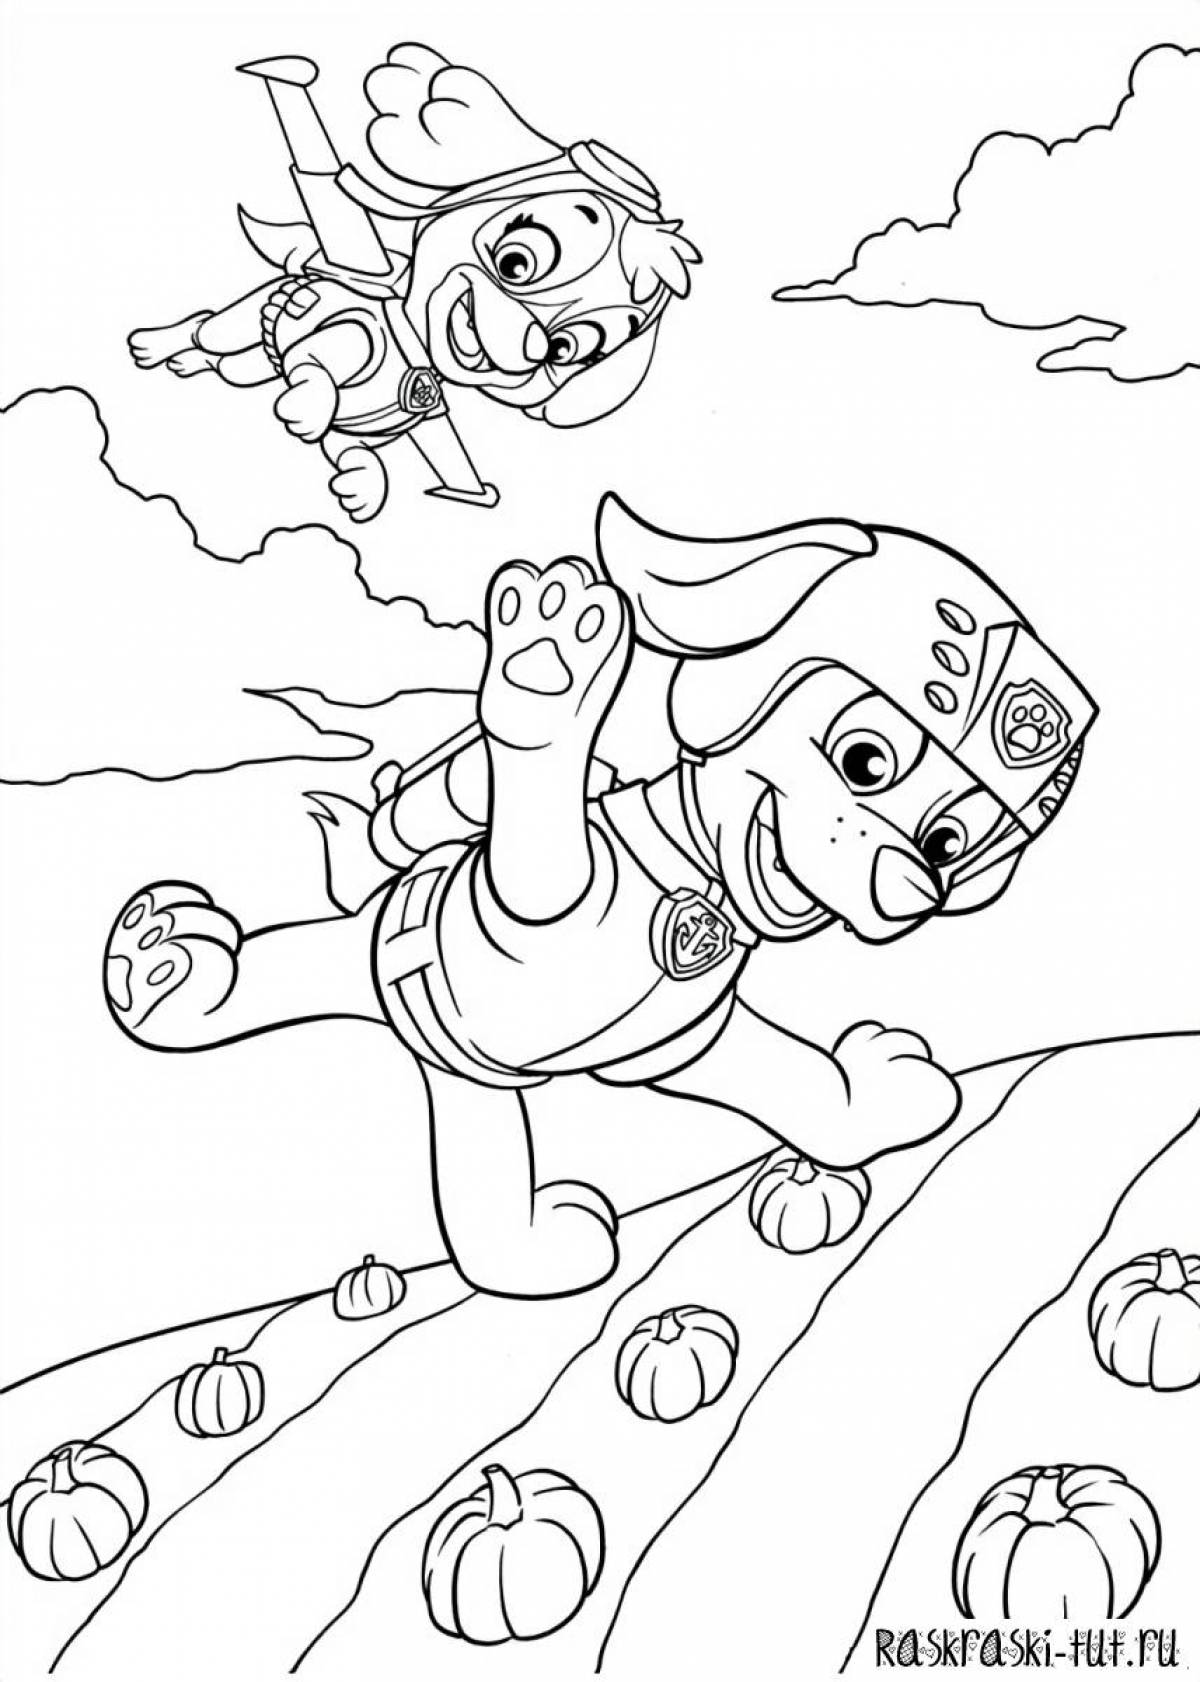 Majestic sky paw patrol coloring page